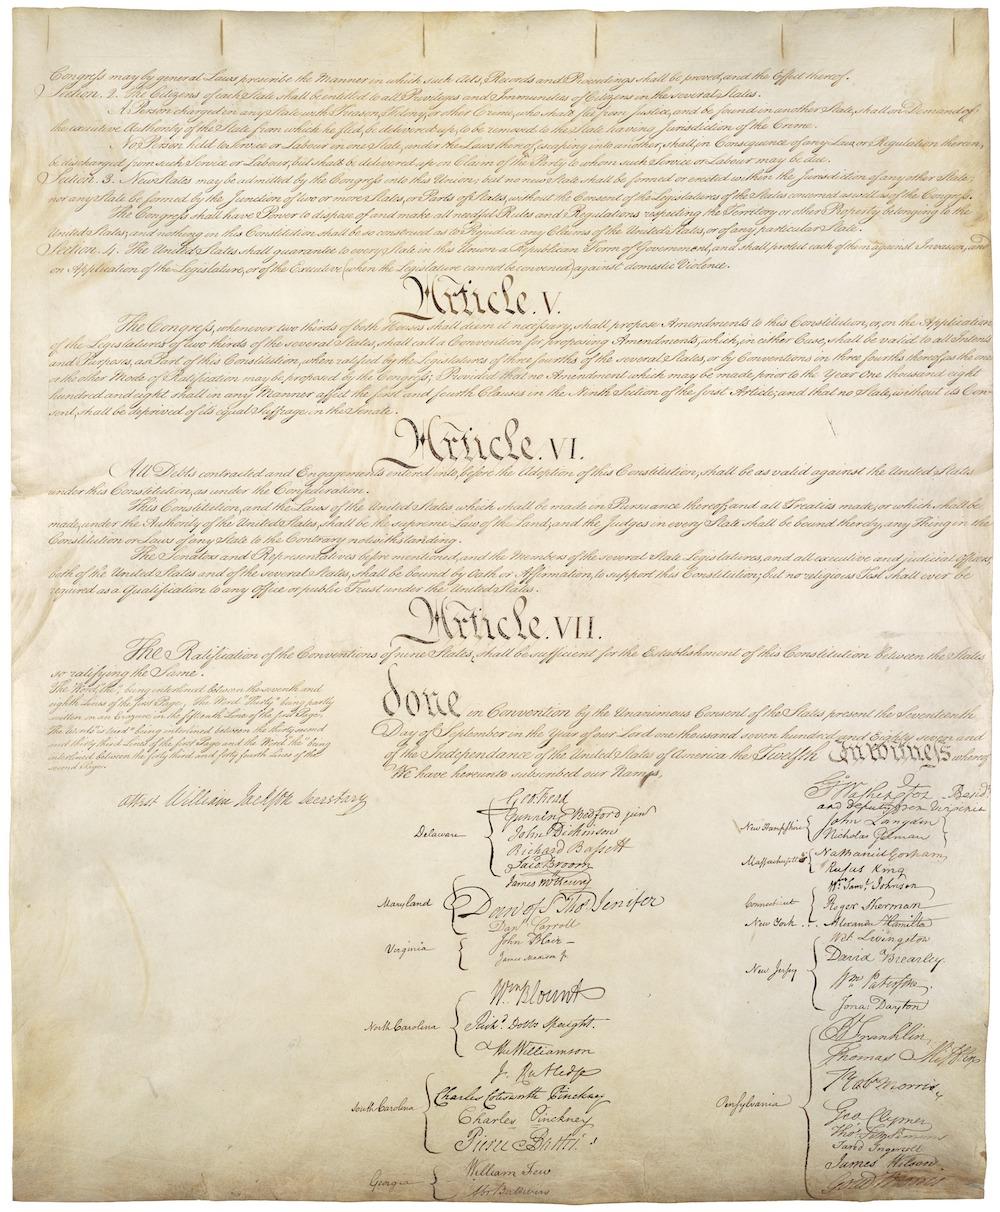 Separation of powers Article I of the Constitution discussed how Congress would be structured.